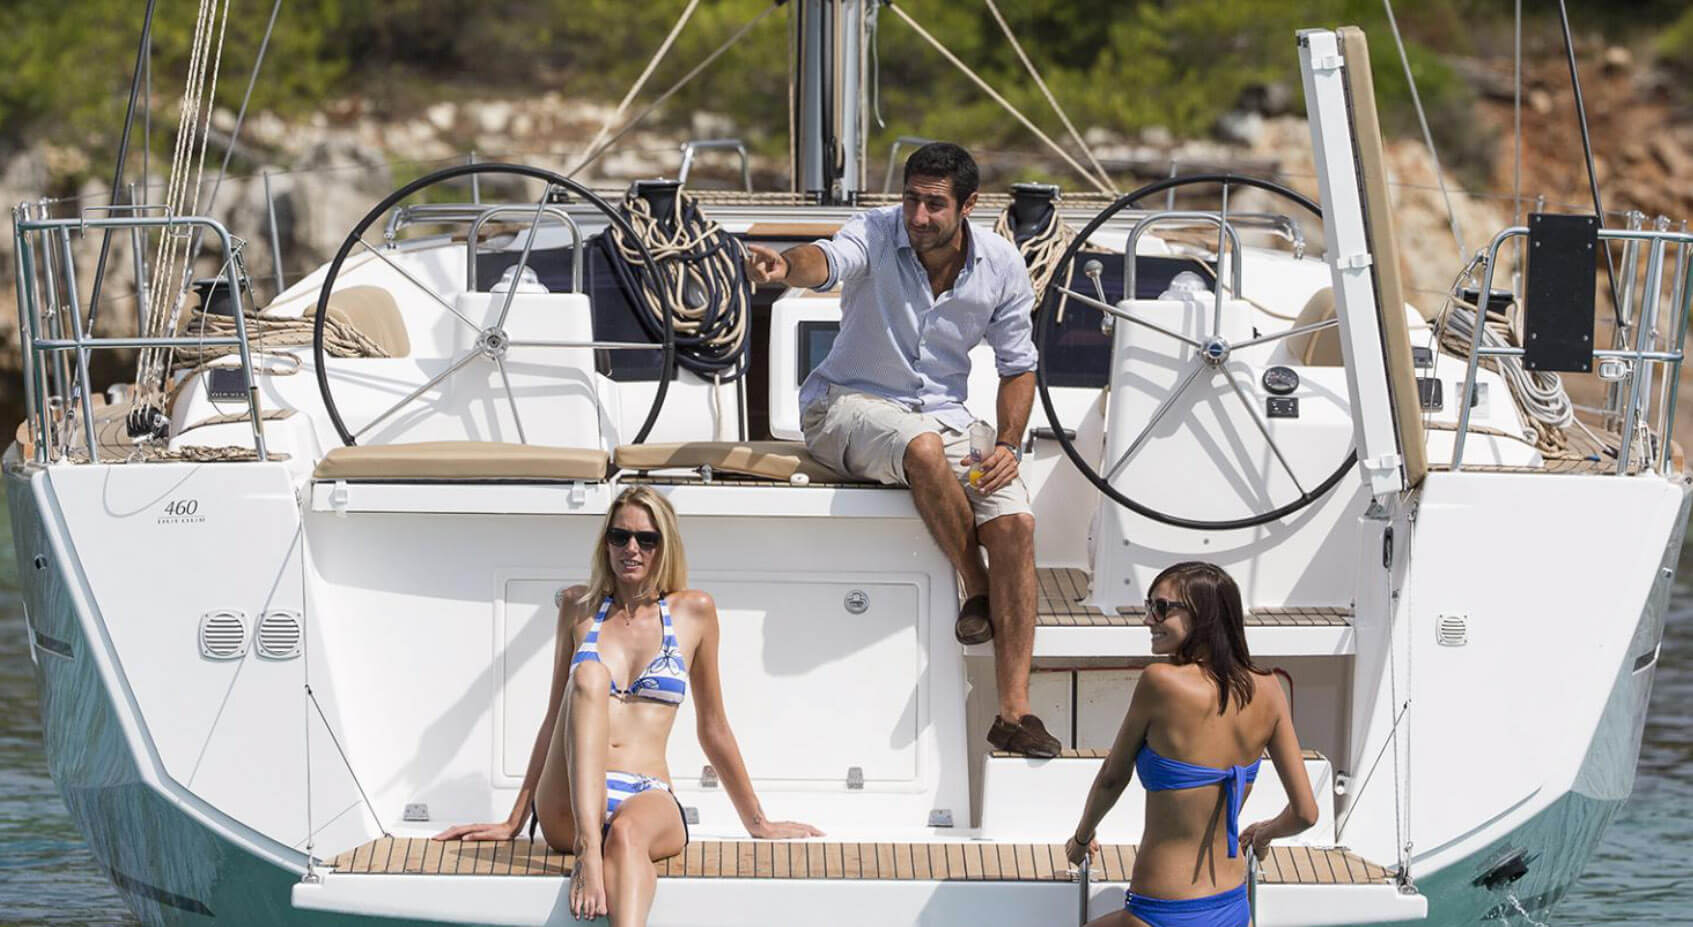 How much does it cost to rent a yacht?